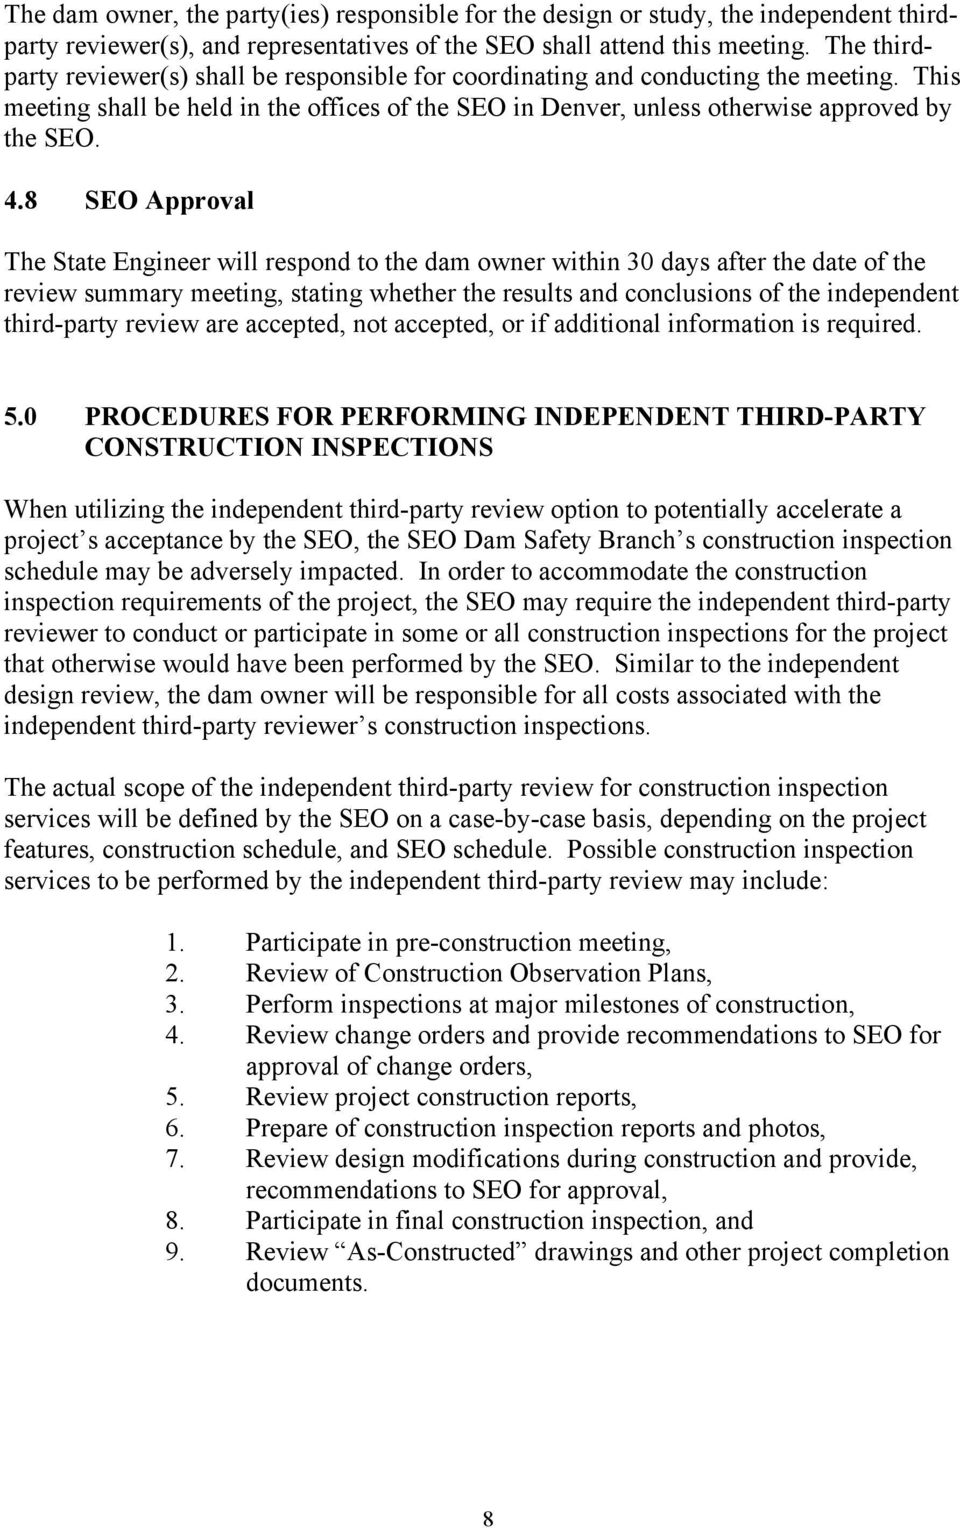 8 SEO Approval The State Engineer will respond to the dam owner within 30 days after the date of the review summary meeting, stating whether the results and conclusions of the independent third-party